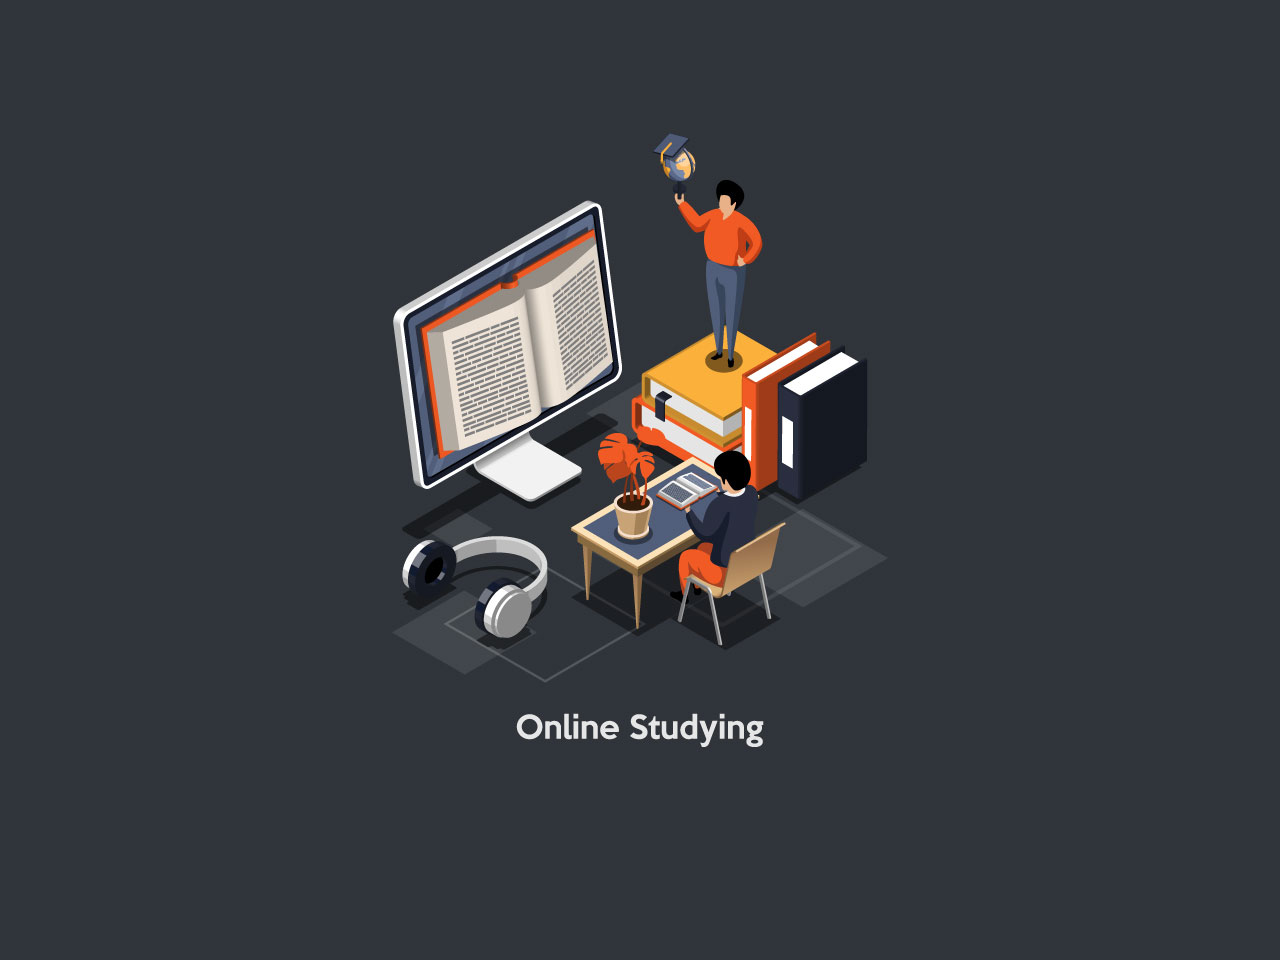 Online class clipart online studying distance online elearning student desk listening teacher boy taking remote course self education video tutorials isometric cartoon 3d illustration